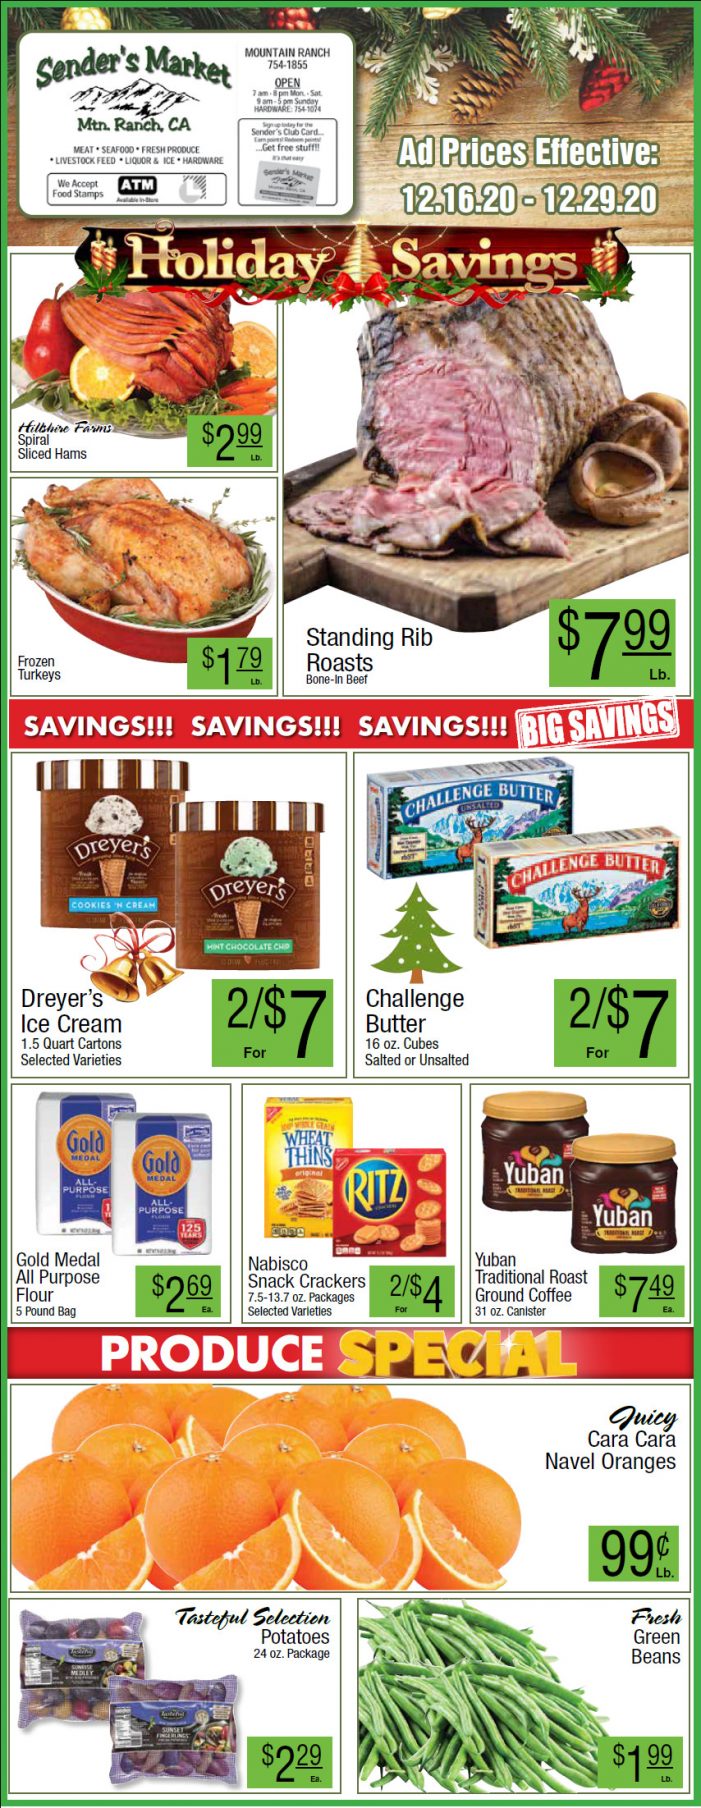 Sender’s Market’s Weekly Ad & Grocery Specials Through December 29th!  Shop Local & Save!